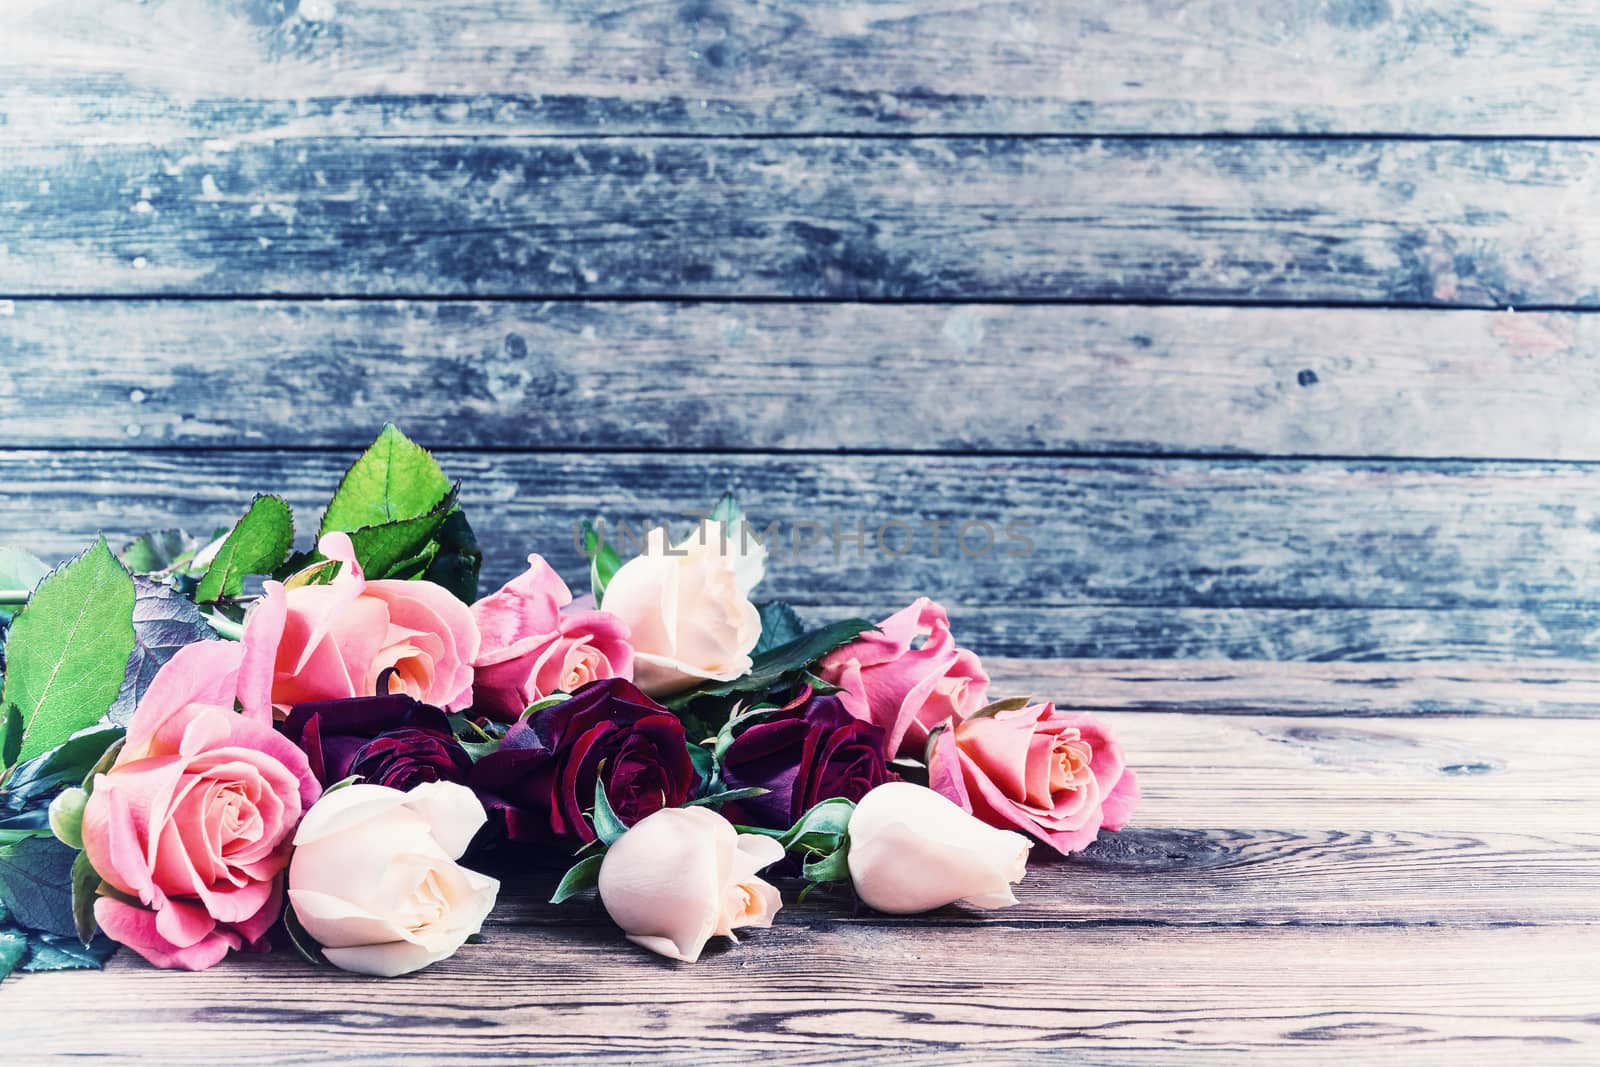 Vintage beautiful roses on old wooden table